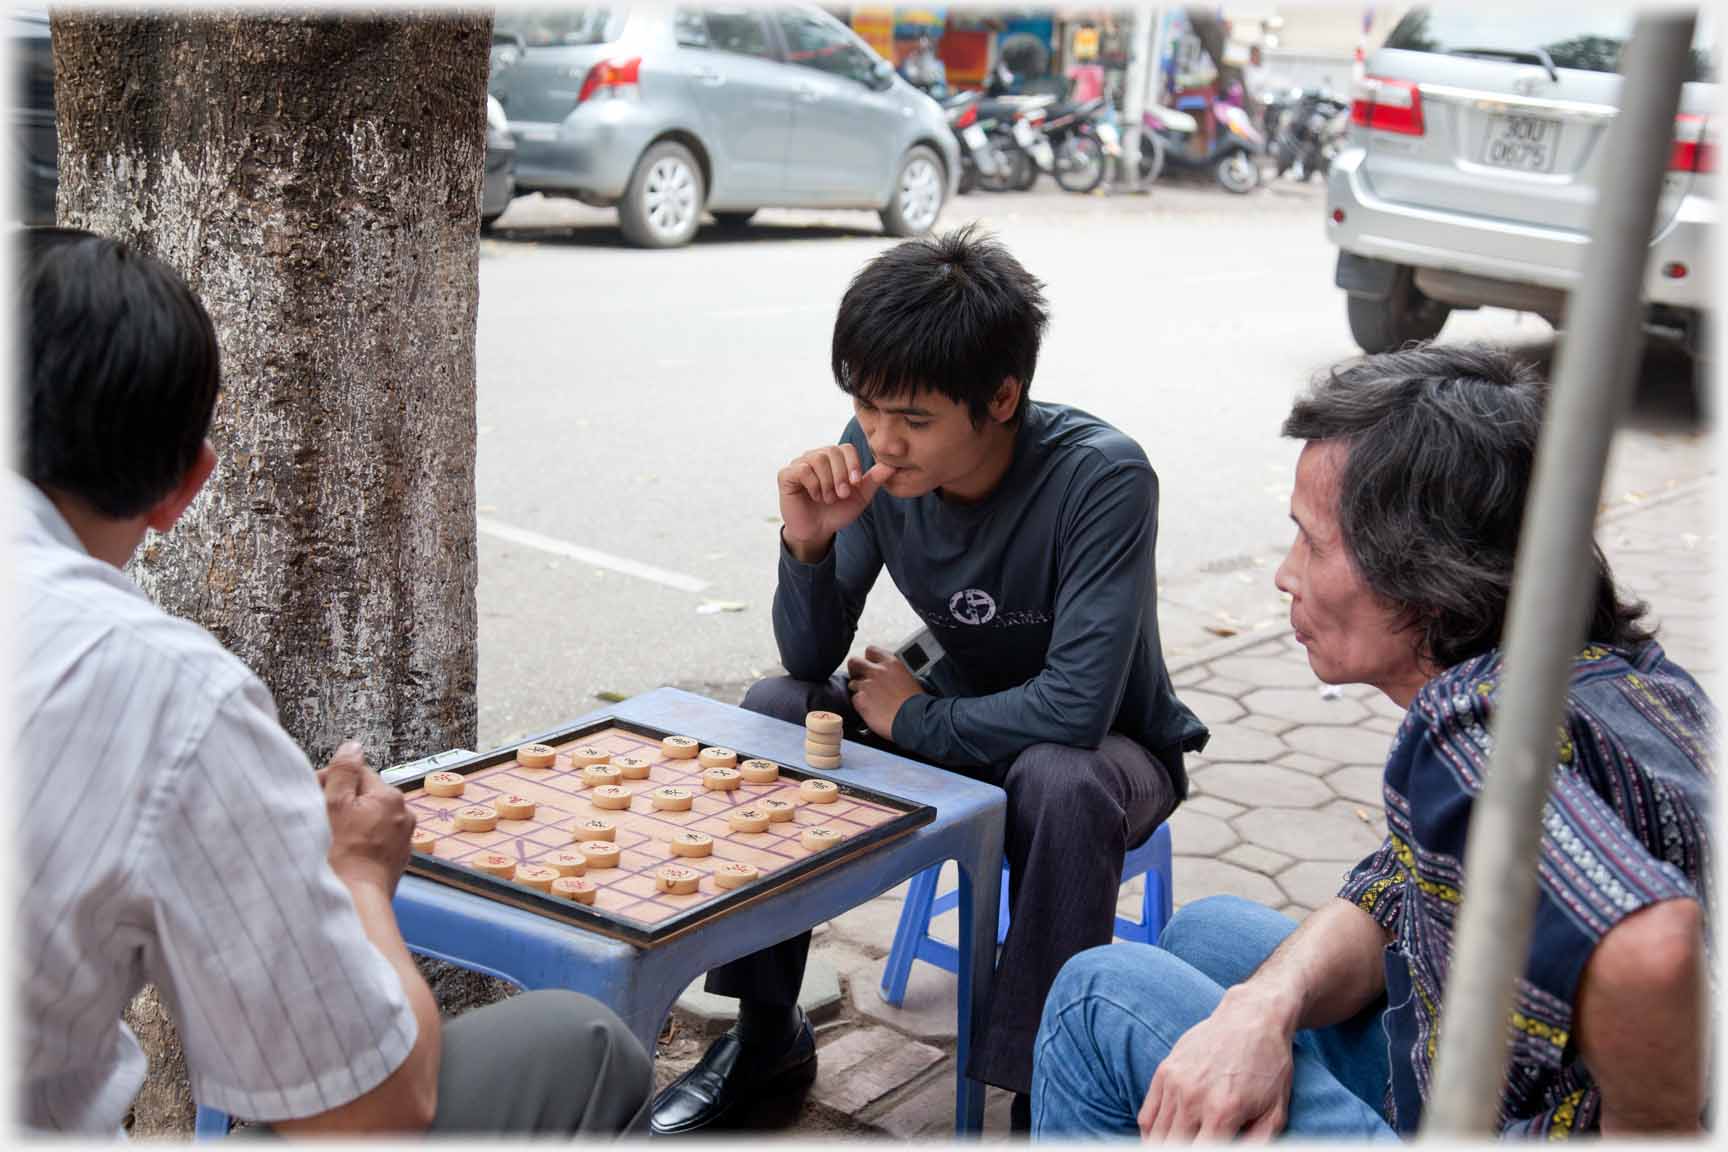 Three men sitting on stools around table with game in progress.